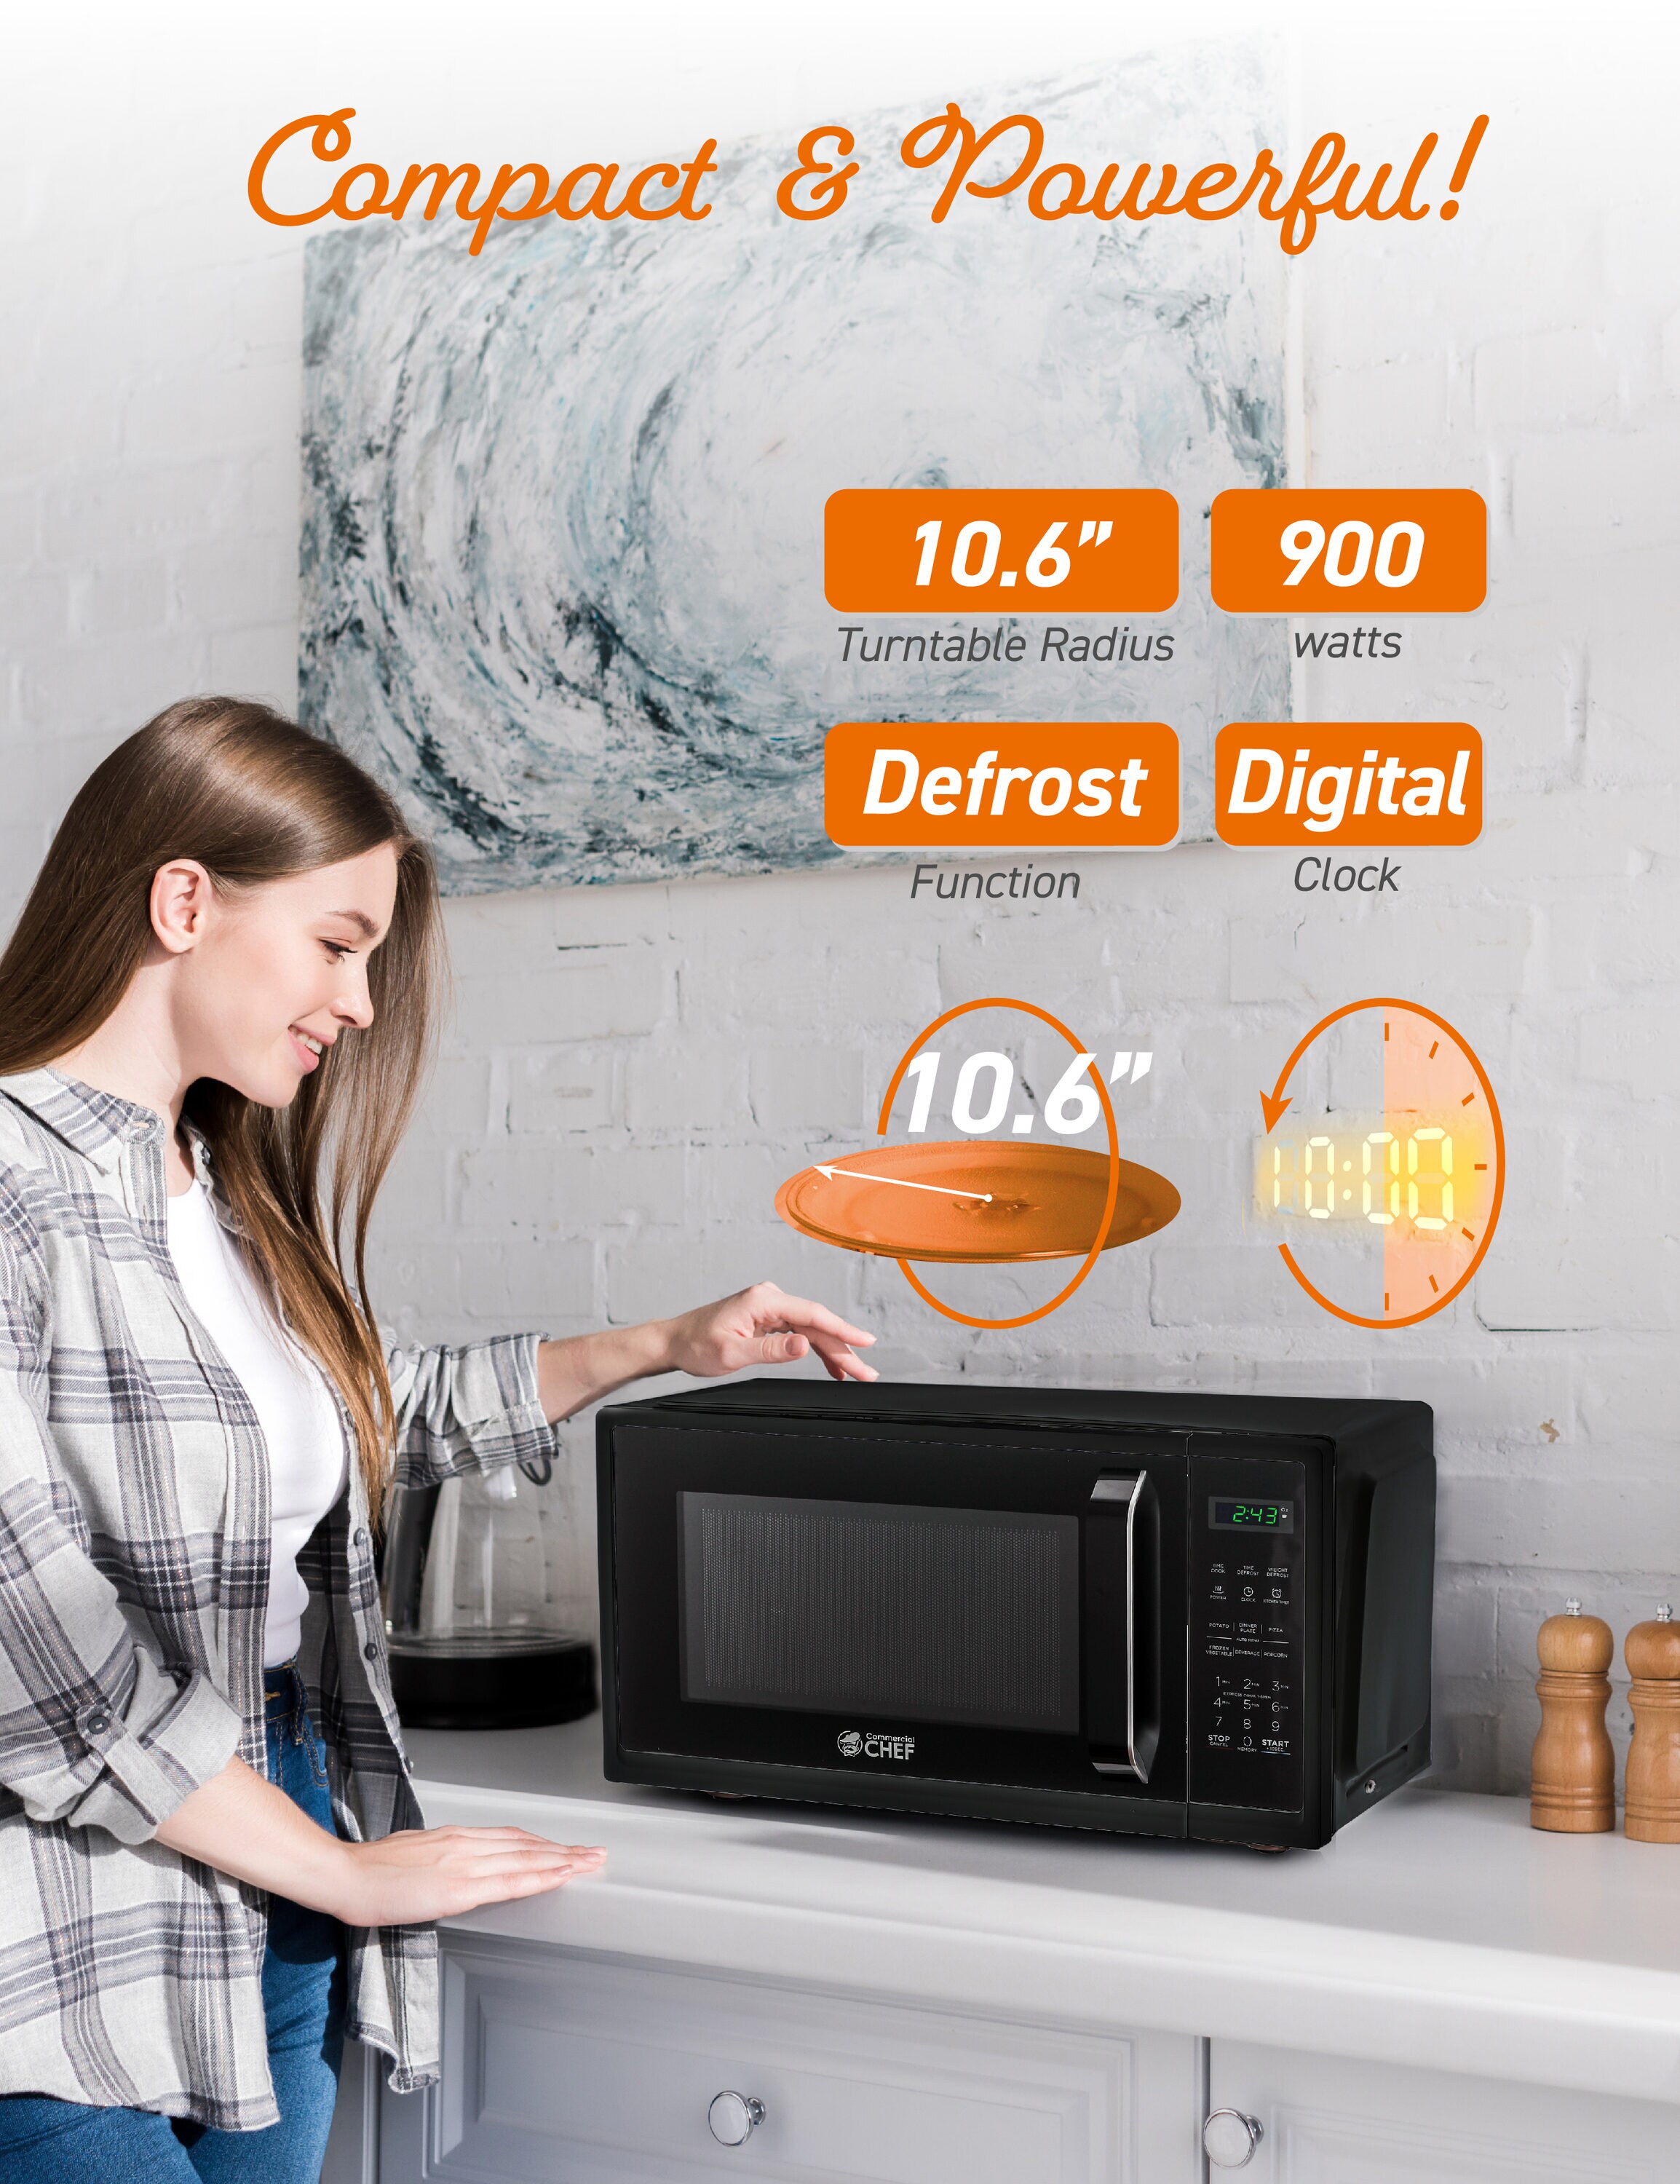 Mainstays Countertop Microwave Oven 700 Watts with LED Display Timer Clock  Kitchen Dorm Room Office